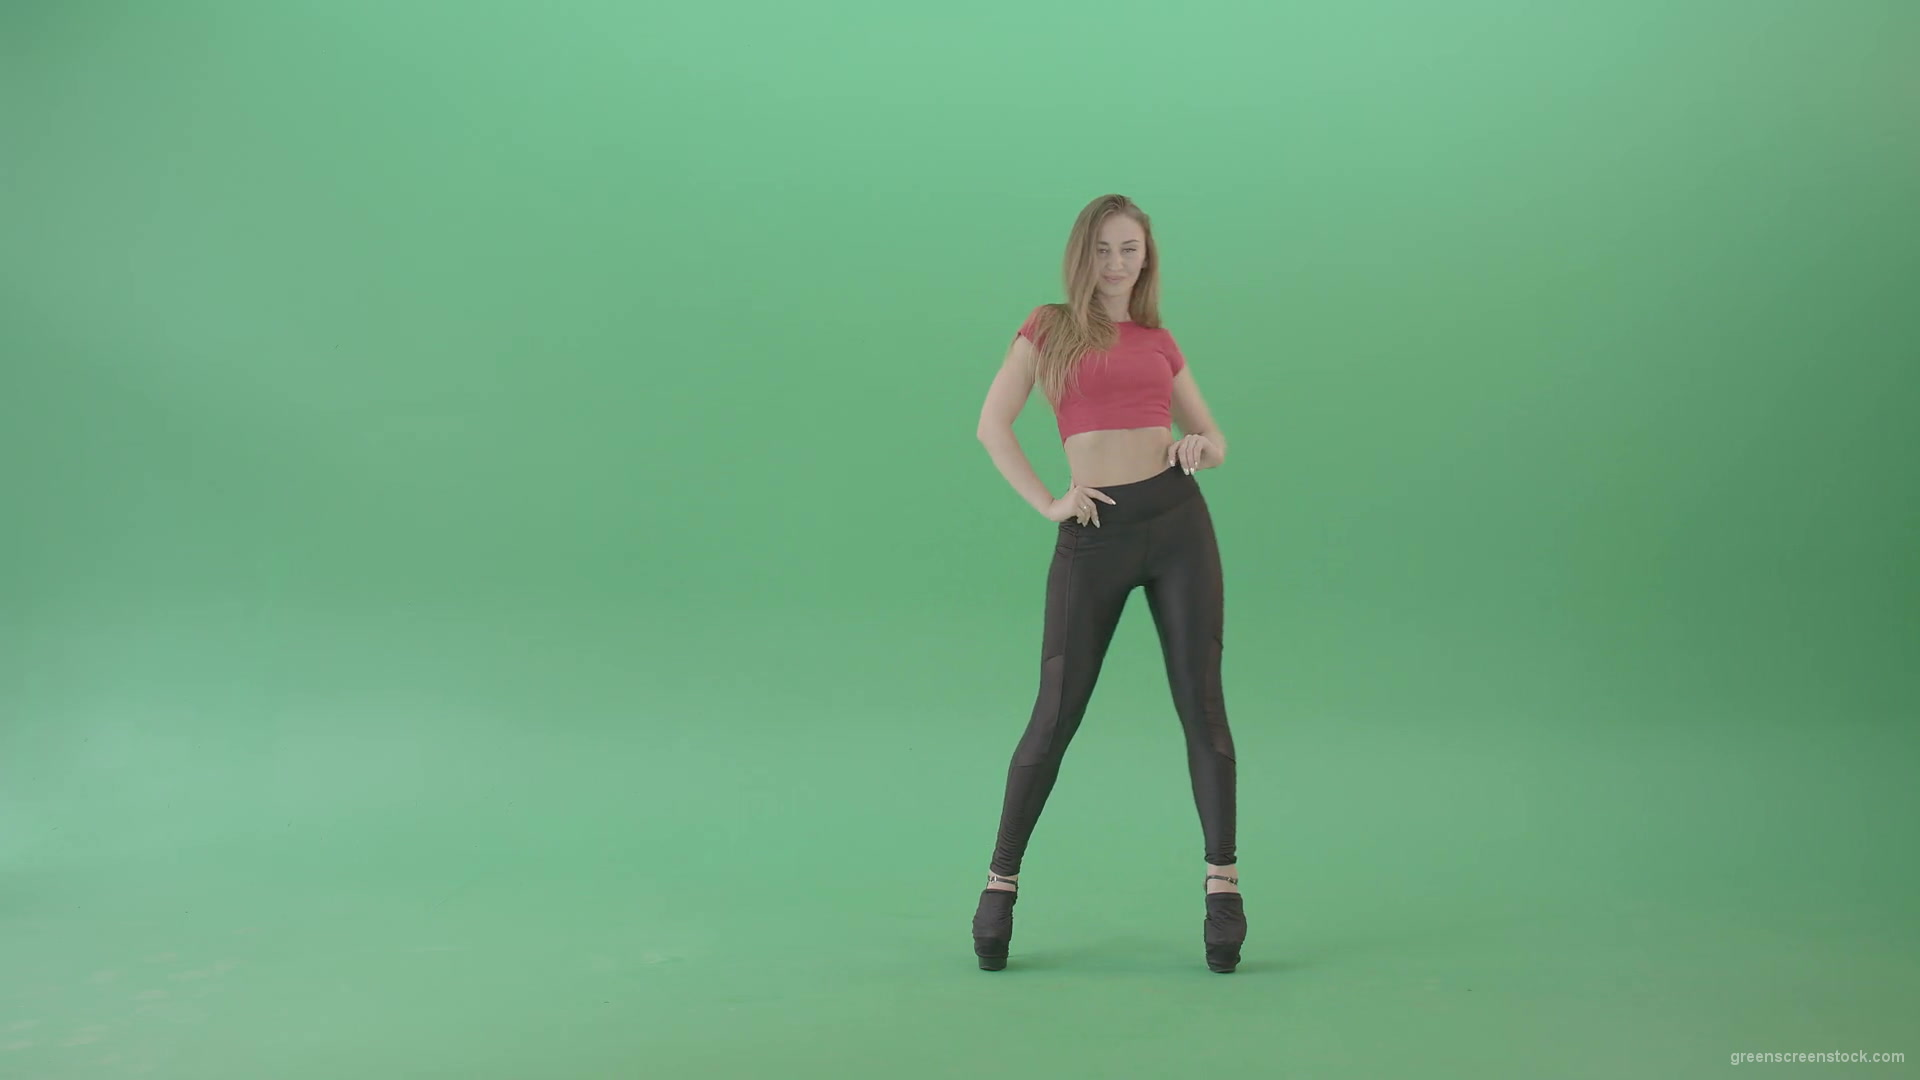 Sexy-Girl-posing-on-green-screen-in-red-t-shirt-4K-Video-Footage-1920_009 Green Screen Stock